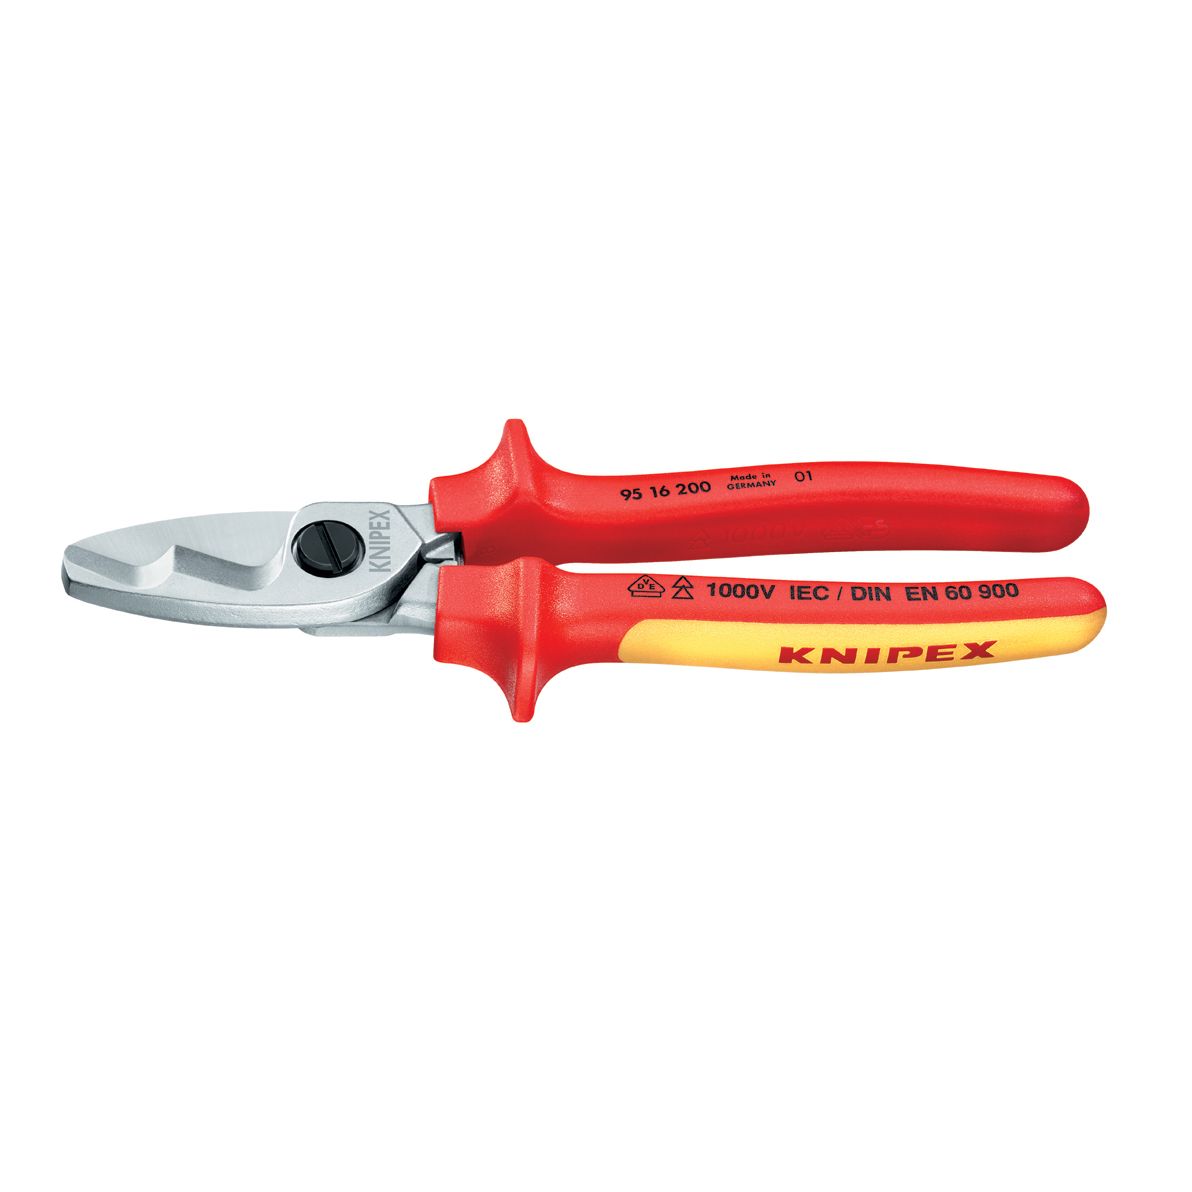 Knipex 8" Cable shears - 1,000V